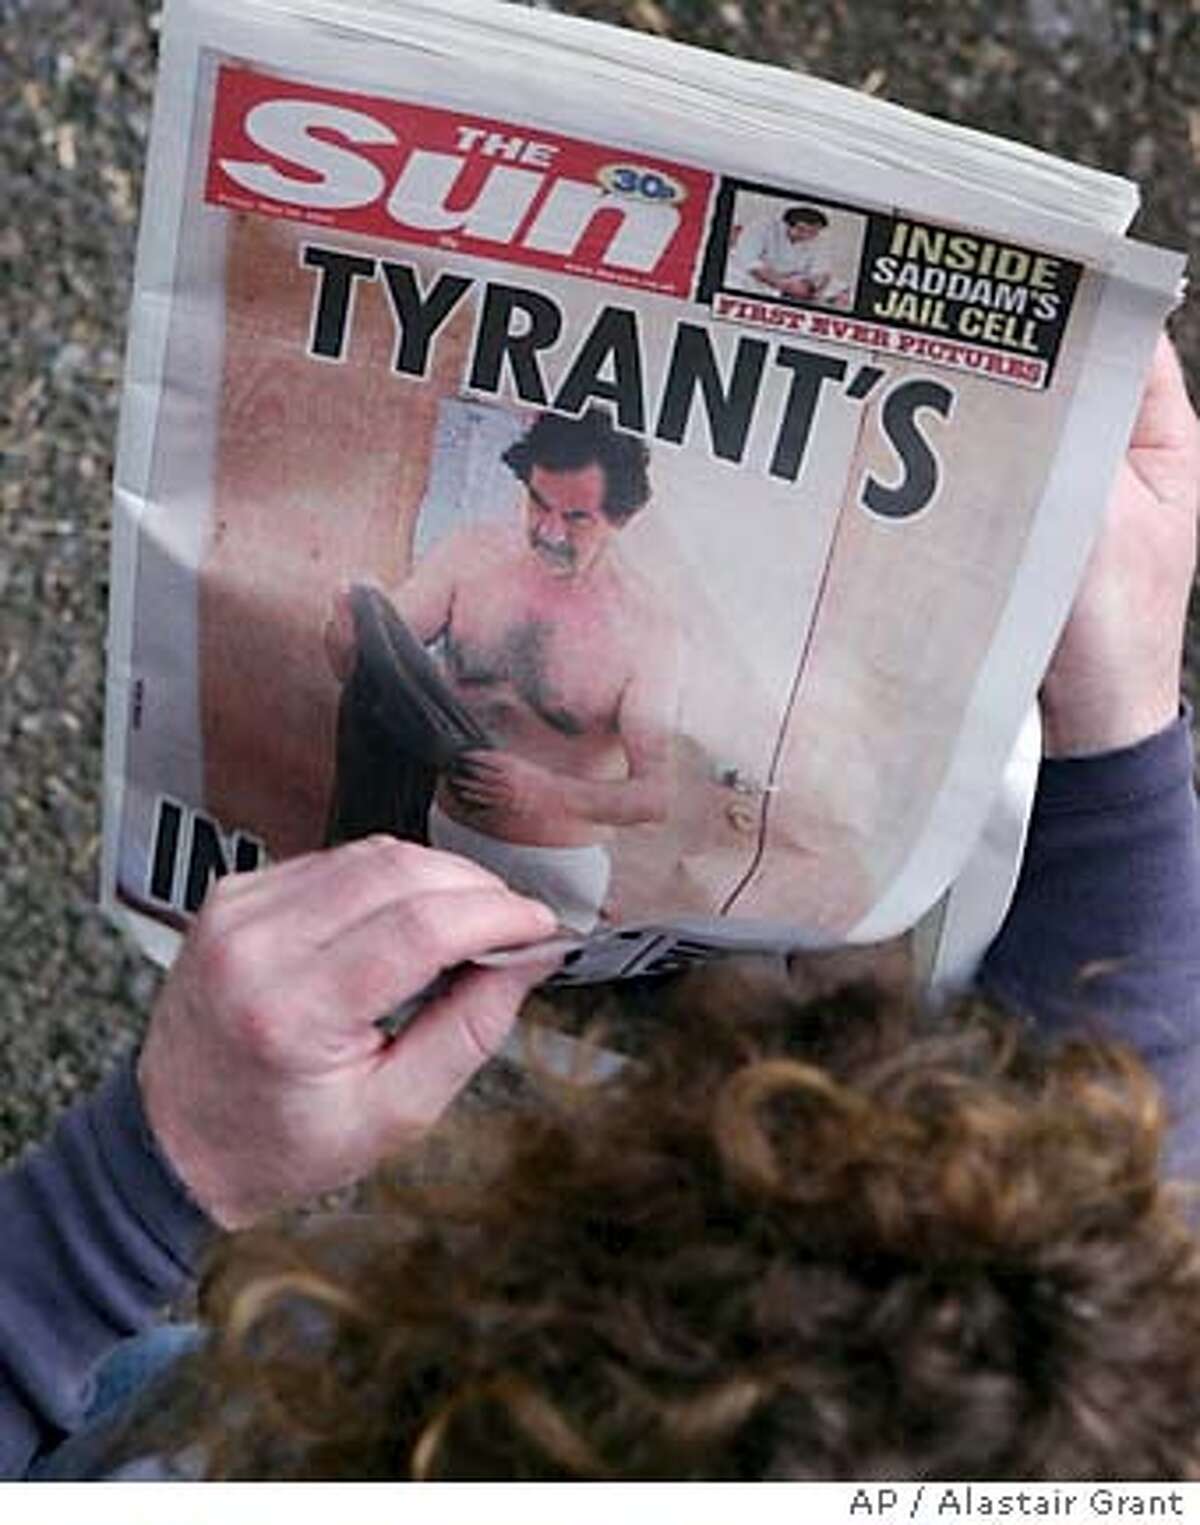 ** THIS IMAGE MUST BE USED IN ITS ENTIRETY ** A man looks at the front page of the British tabloid newspaper 'The Sun', carrying a photo showing former Iraqi president Saddam Hussein, clad only in white briefs, folding a pair of trousers, in London, Friday May 20, 2005. The Sun said it obtained a number of photos from "U.S. military sources", and a statement issued by the U.S. military in Baghdad said the photos violated military guidelines " and possibly Geneva Convention guidelines for the humane treatment of detained individuals". It said the source of the photos was unknown, but they were believed to have been taken more than a year ago.(AP Photo/Alastair Grant)